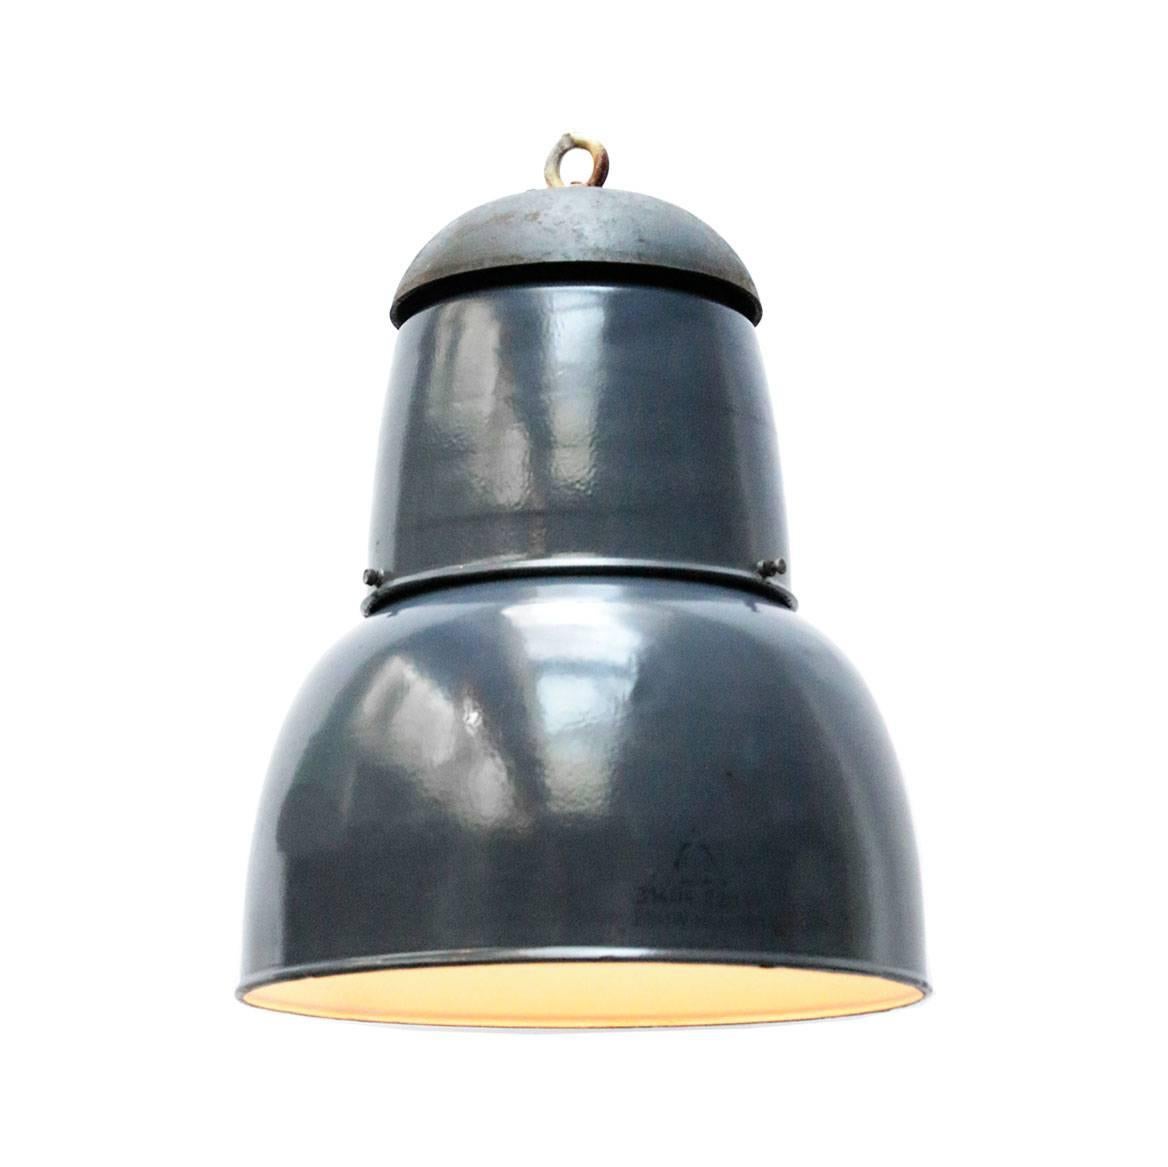 Dark blue enamel Industrial pendant with white interior. 

Weight: 7.0 kg / 15.4 lb, 

Priced per individual item. All lamps have been made suitable by international standards for incandescent light bulbs, energy-efficient and LED bulbs. E26/E27